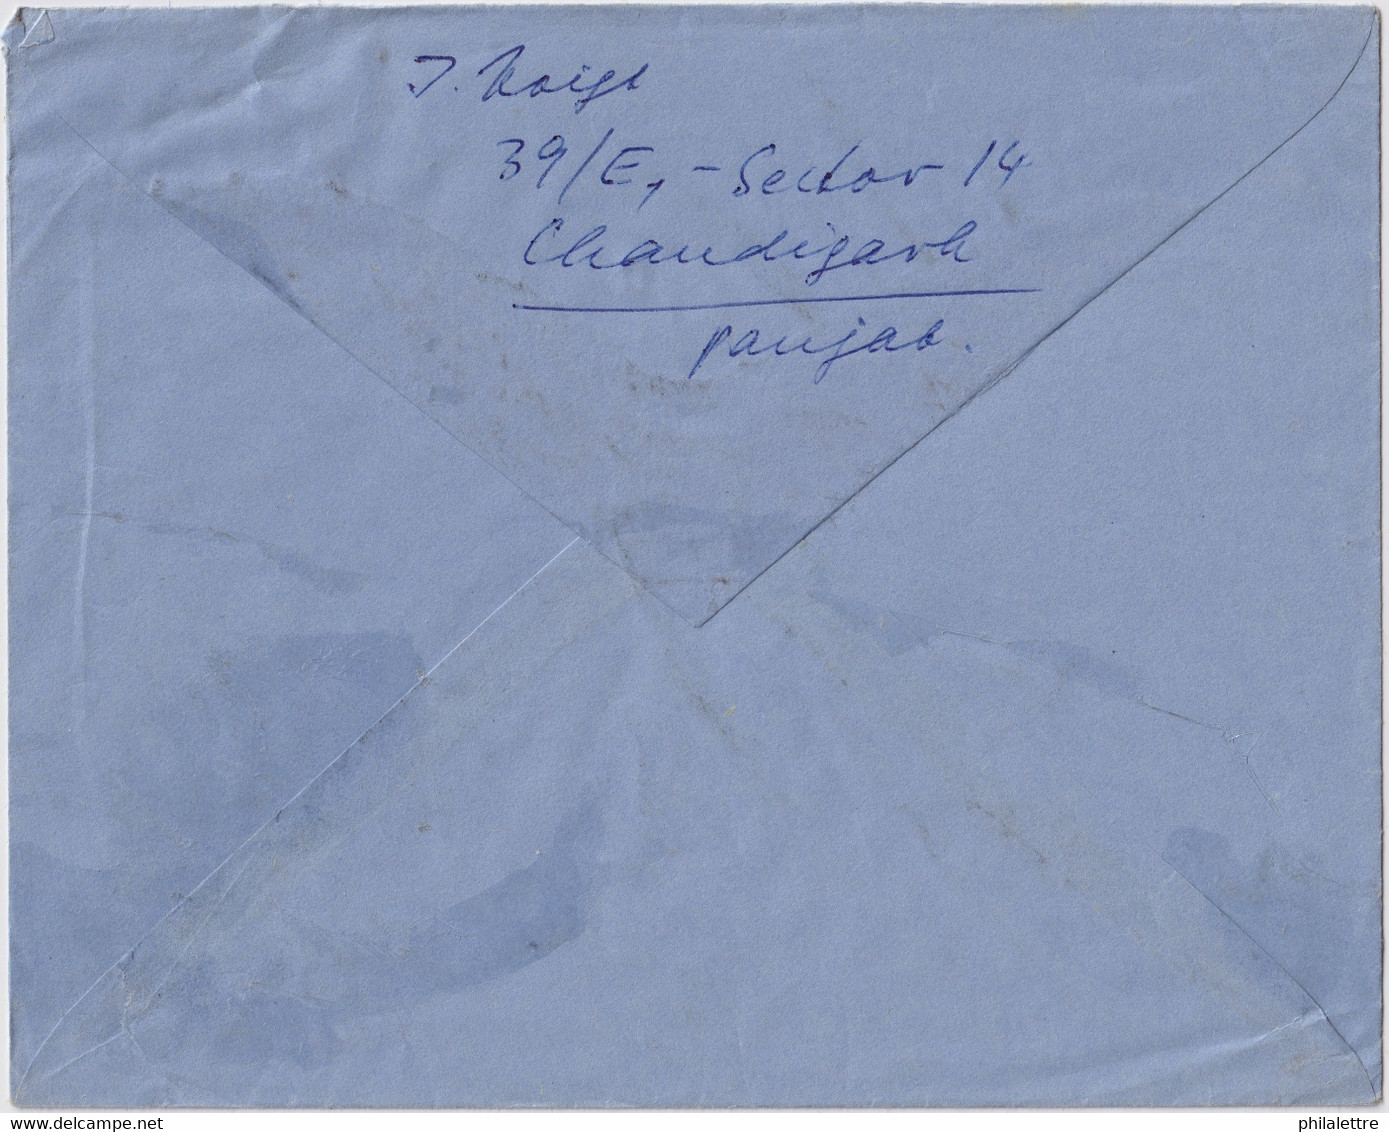 INDE / INDIA - 1962 - Air Mail Postal Envelope From CHANDIGARH To Kiel, Germany - Aérogrammes